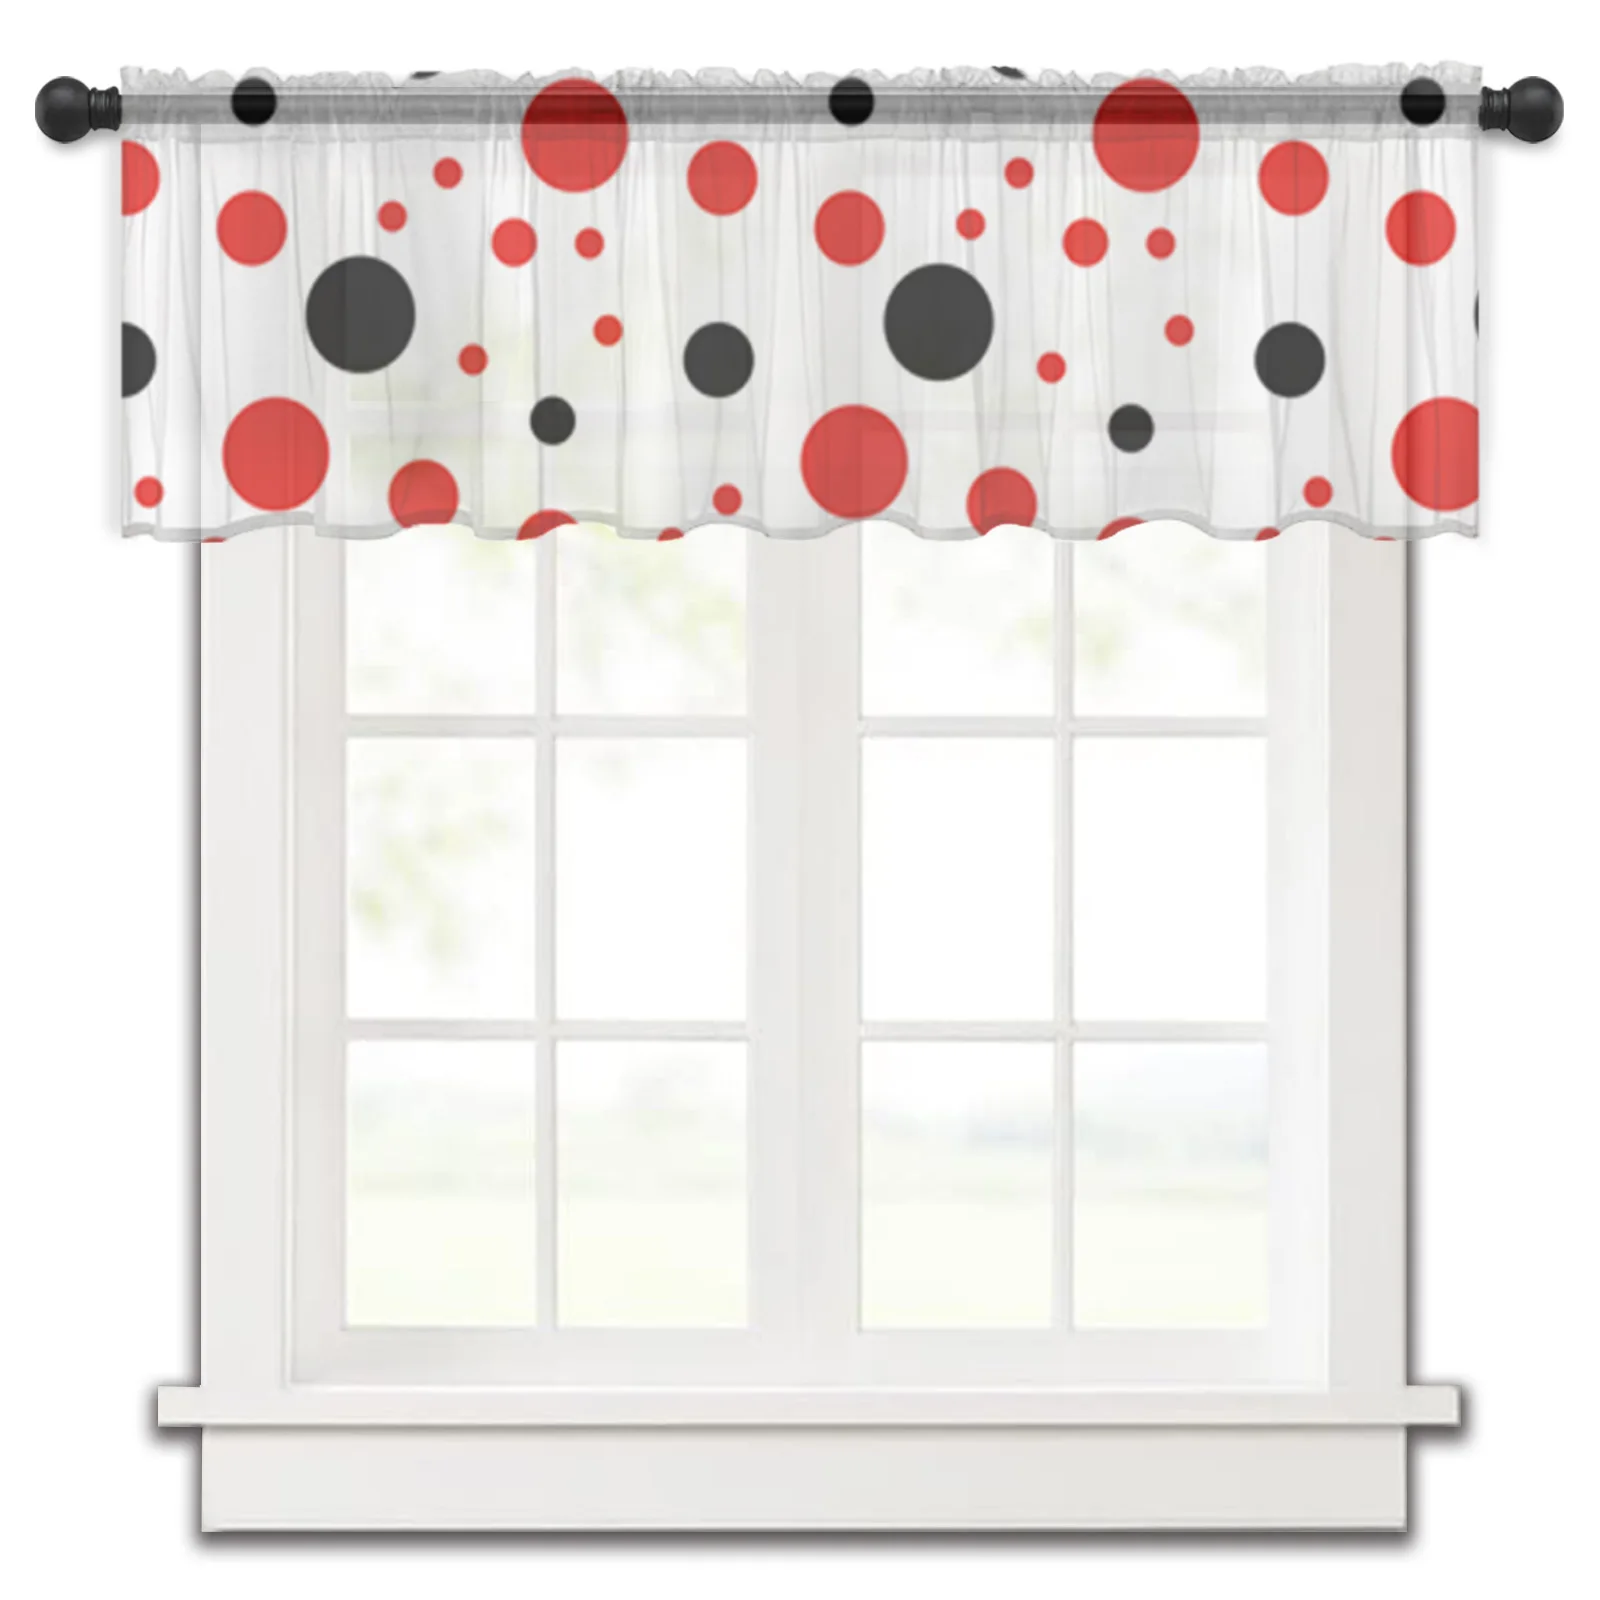 

Red Black Polka Dots Tulle Kitchen Small Window Curtain Valance Sheer Short Curtain Bedroom Living Room Home Decor Voile Drapes